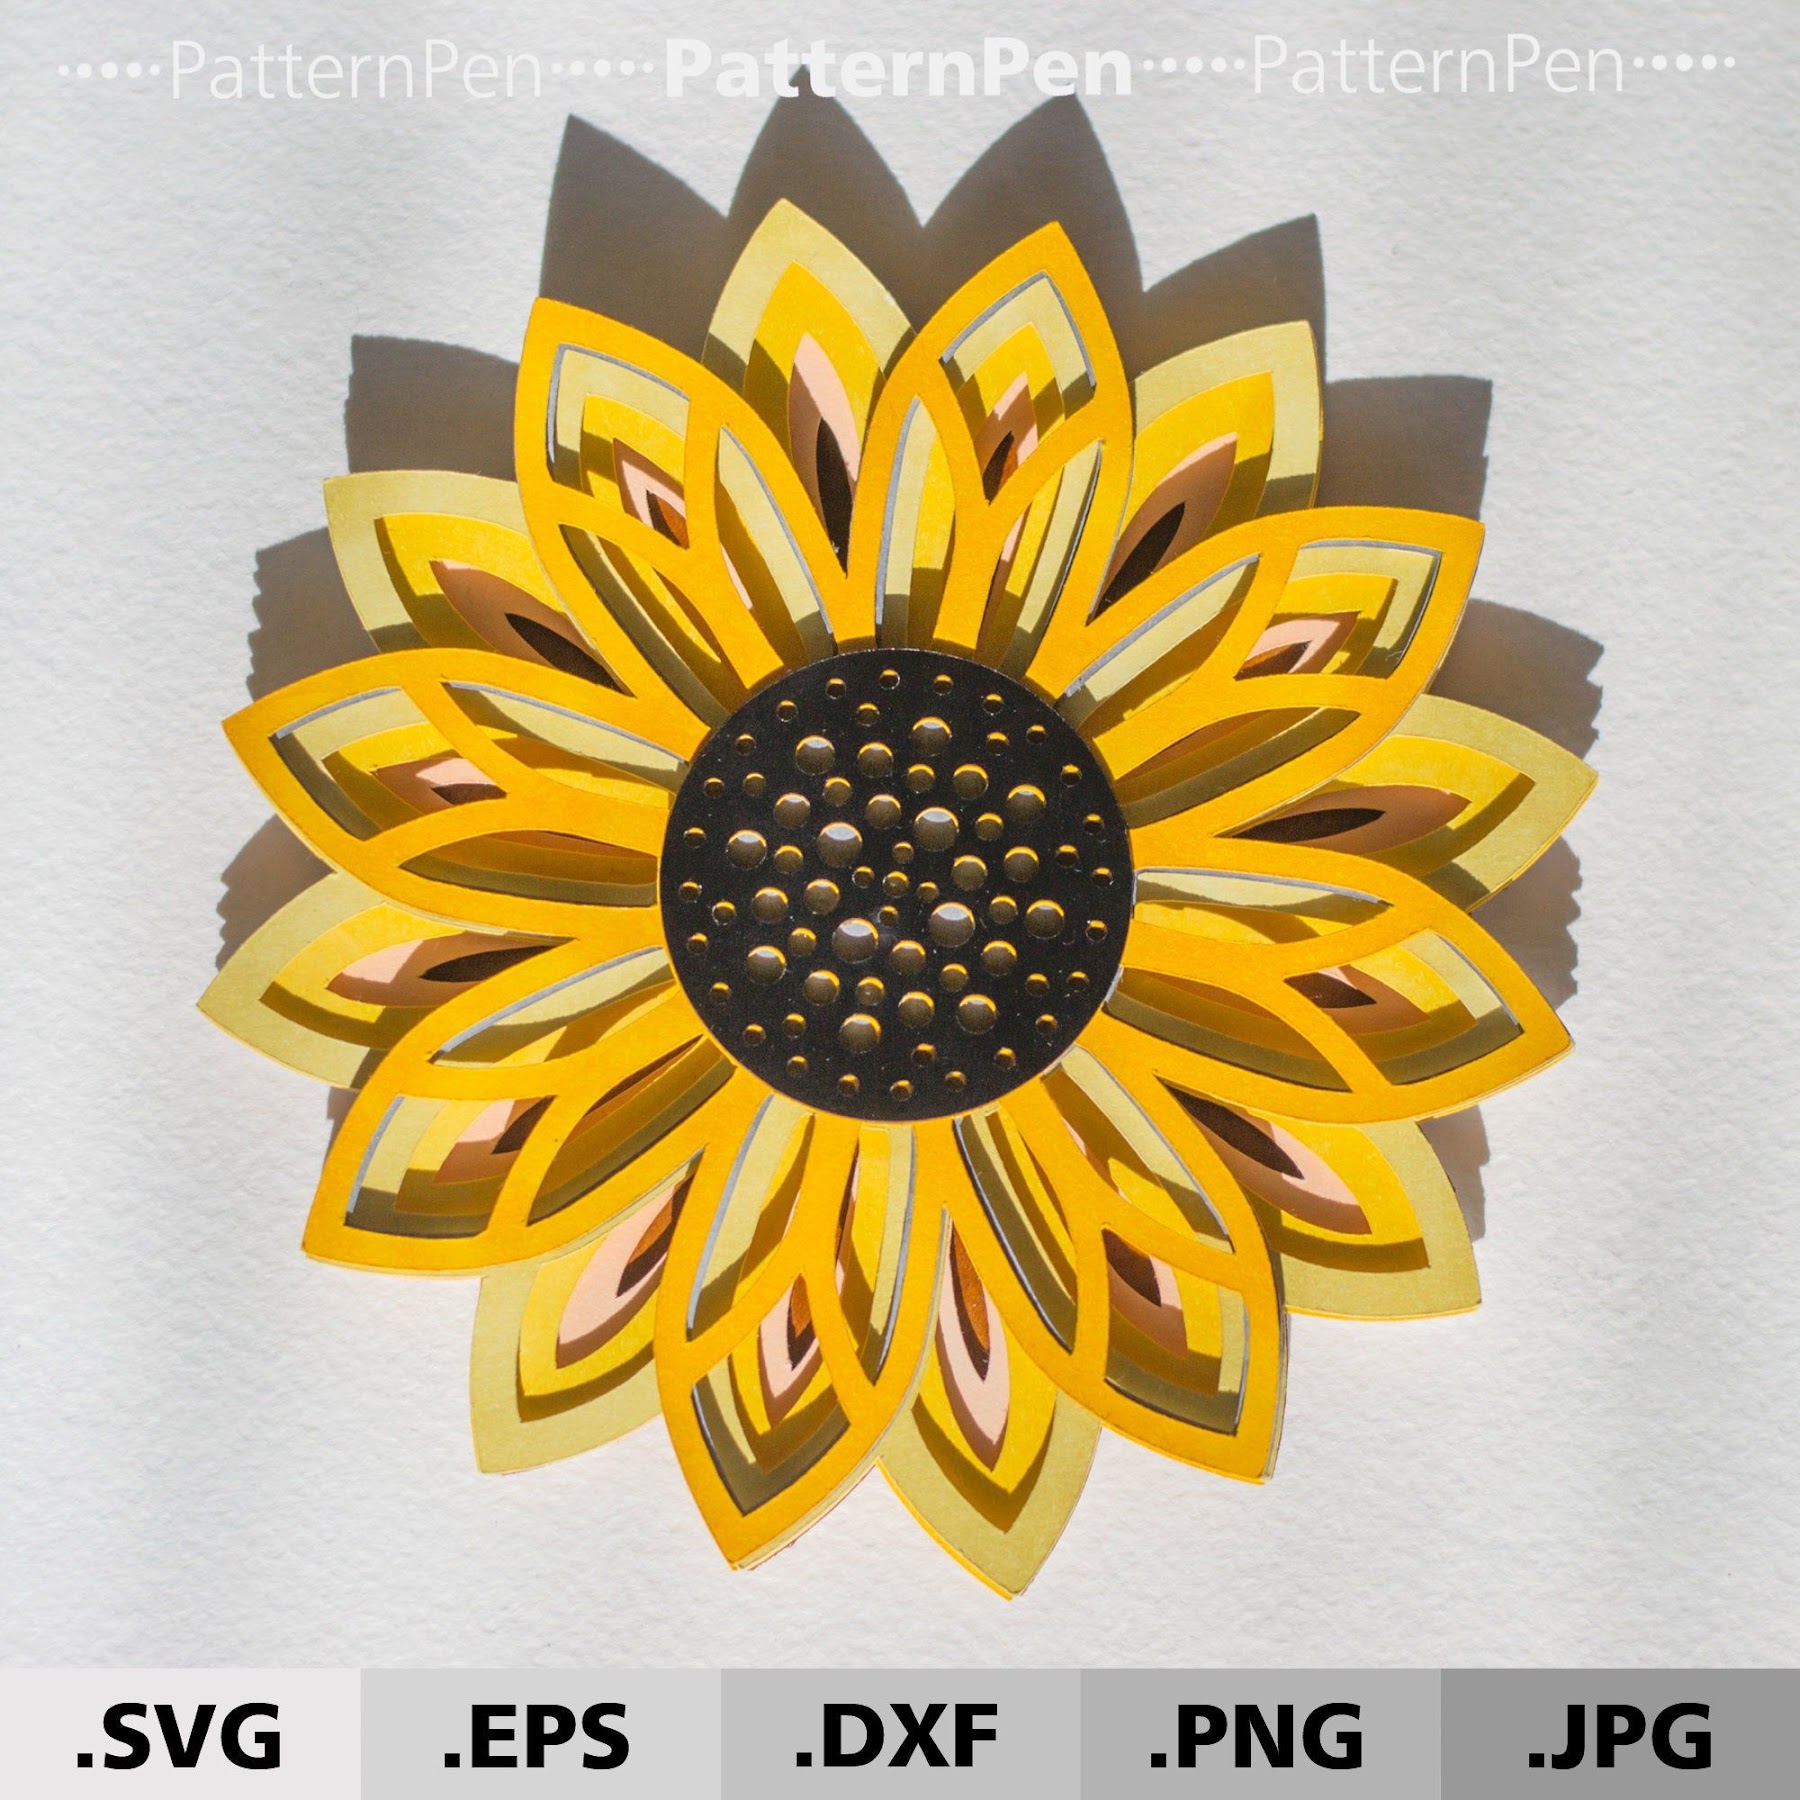 Download Layered Sunflower Mandala Svg - 232+ SVG File for Cricut for Cricut, Silhouette and Other Machine